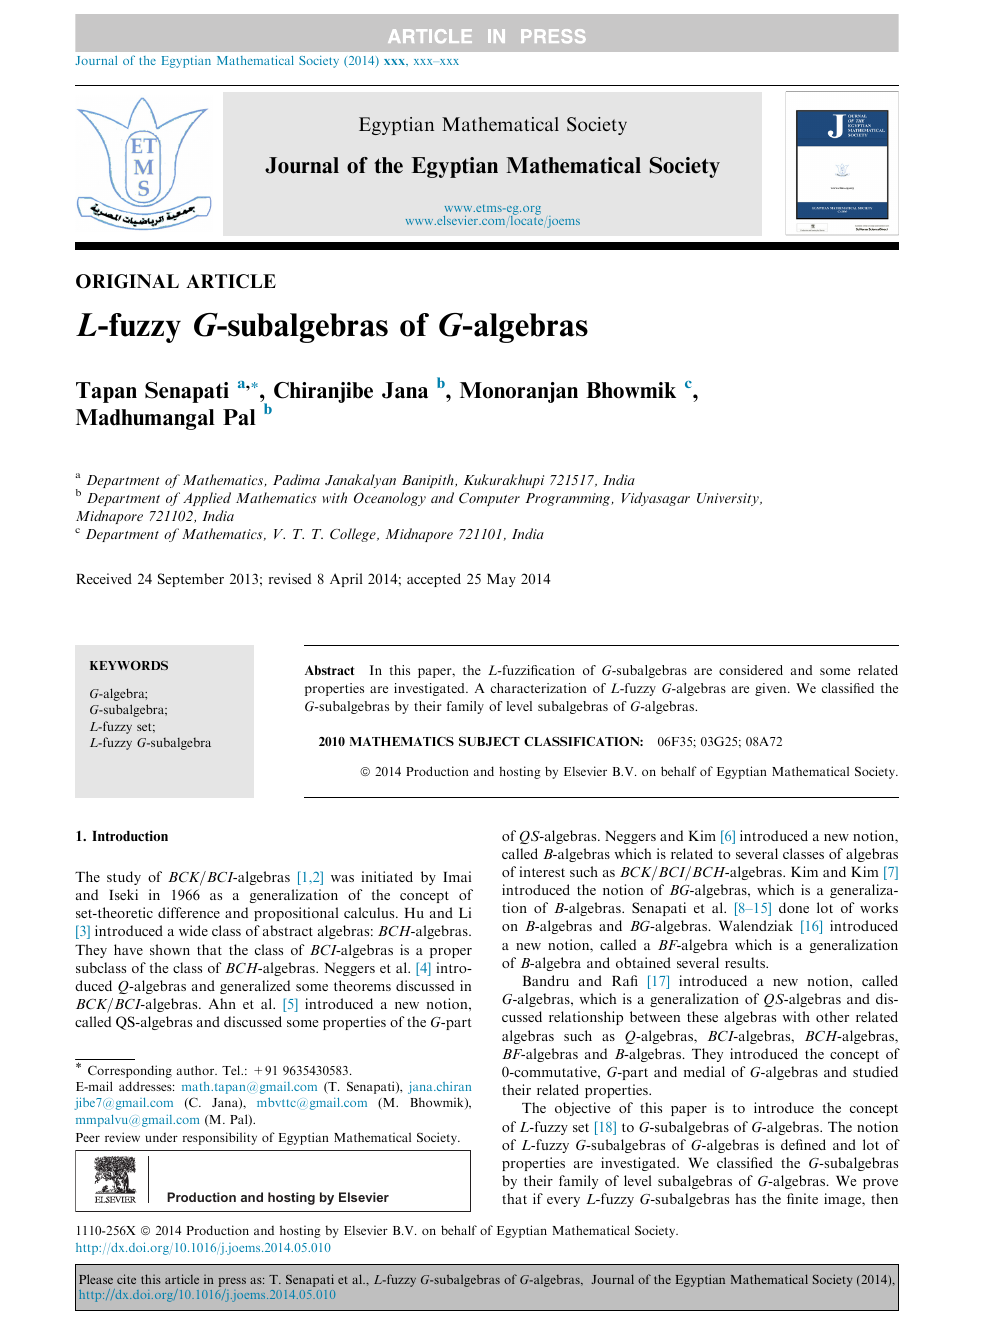 L Fuzzy G Subalgebras Of G Algebras Topic Of Research Paper In Mathematics Download Scholarly Article Pdf And Read For Free On Cyberleninka Open Science Hub